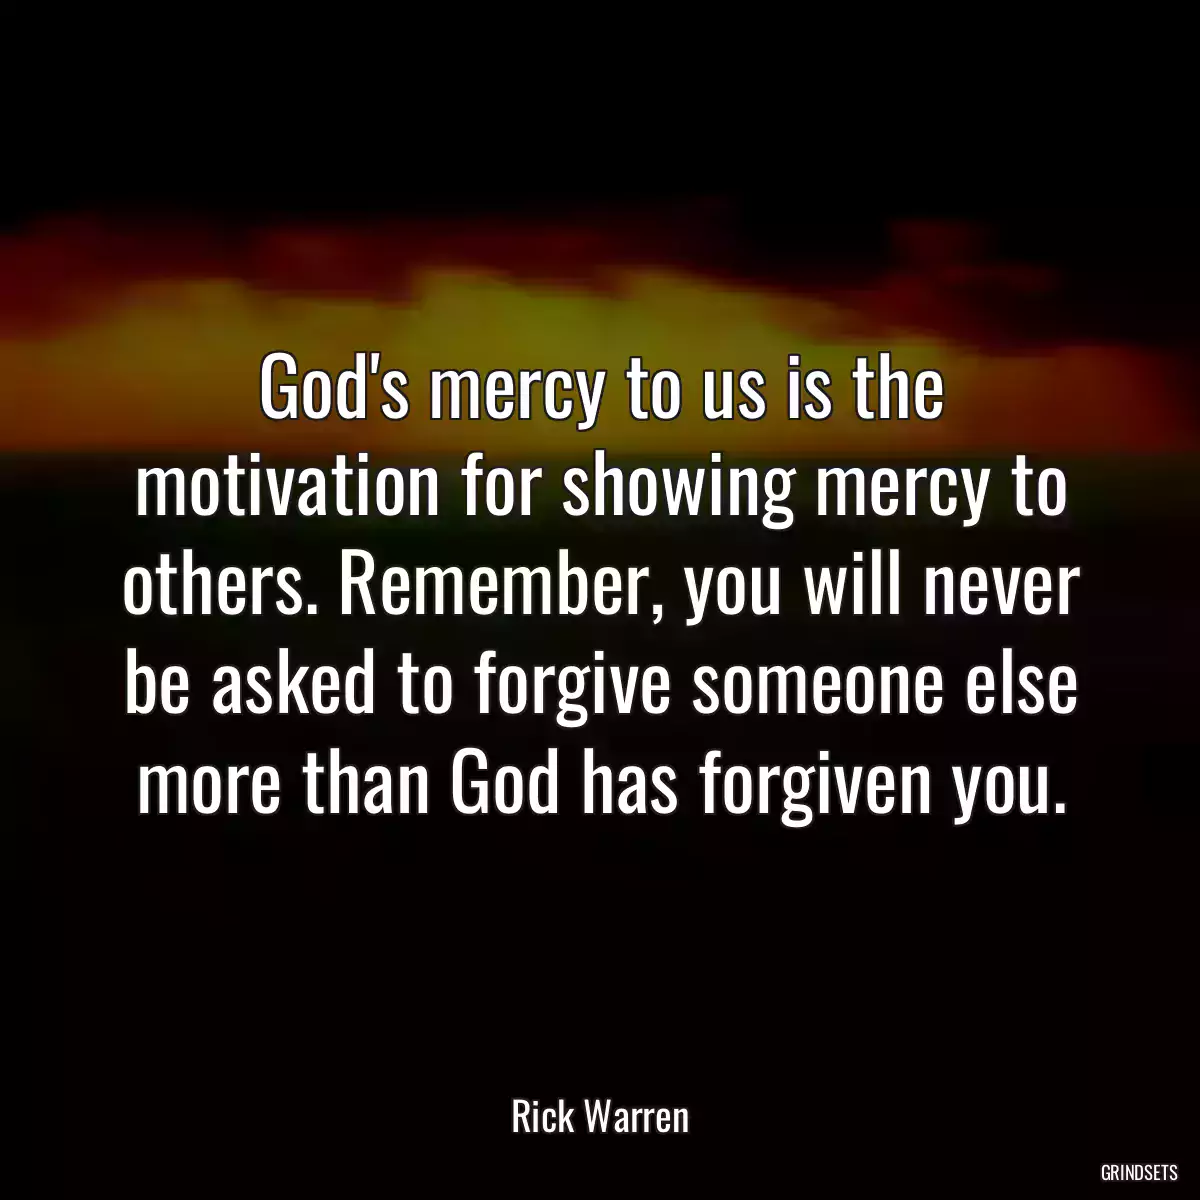 God\'s mercy to us is the motivation for showing mercy to others. Remember, you will never be asked to forgive someone else more than God has forgiven you.